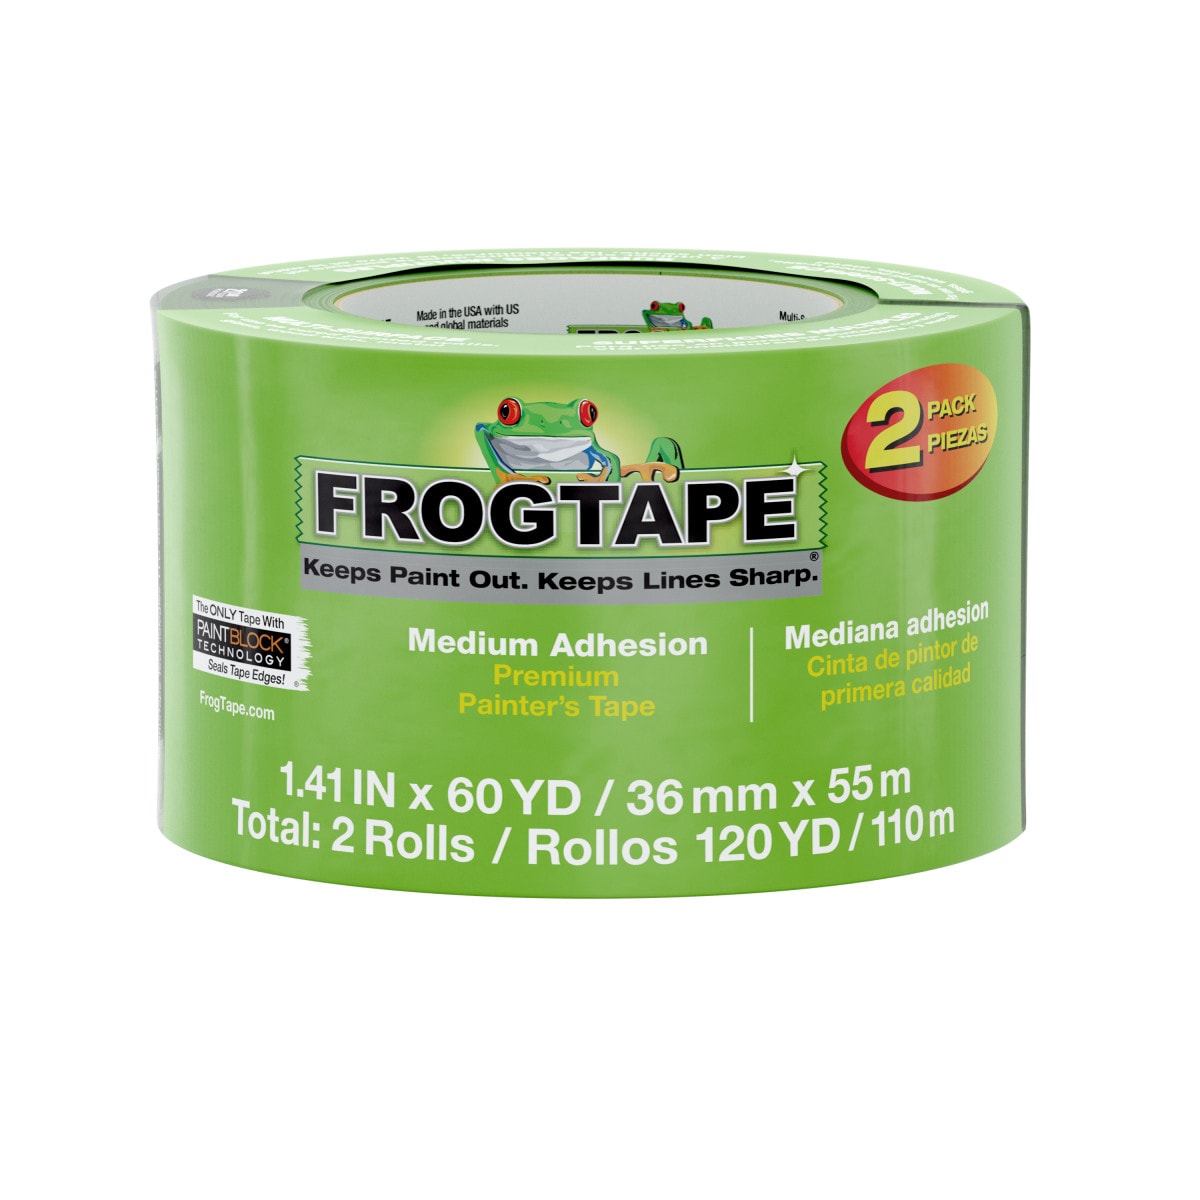 FrogTape Delicate Surface Painting Tape, Yellow, 1.41 in. x 60 yd.